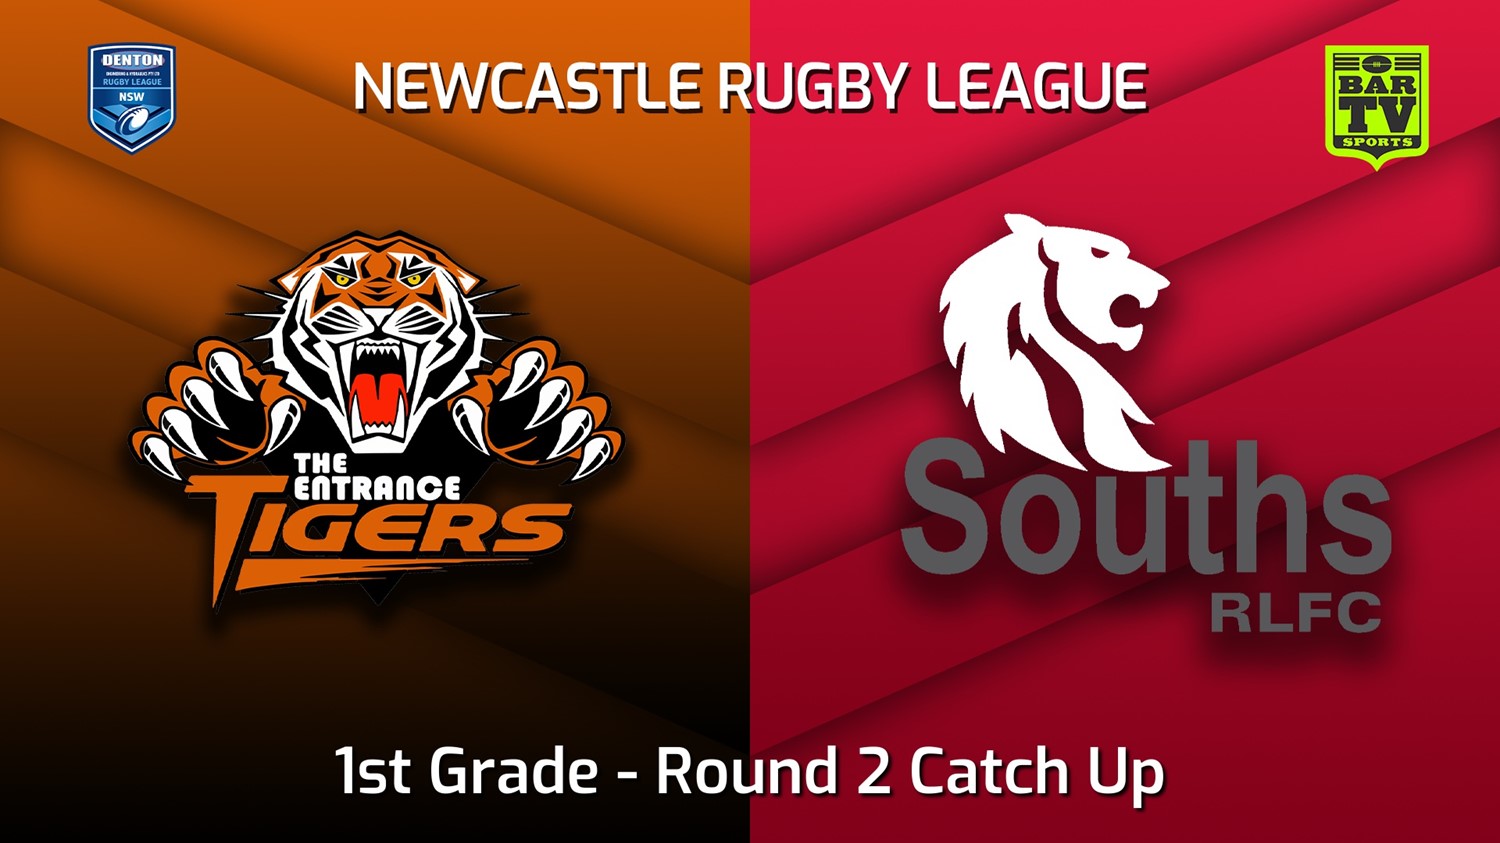 220515-Newcastle Round 2 Catch Up - 1st Grade - The Entrance Tigers v South Newcastle Lions Minigame Slate Image